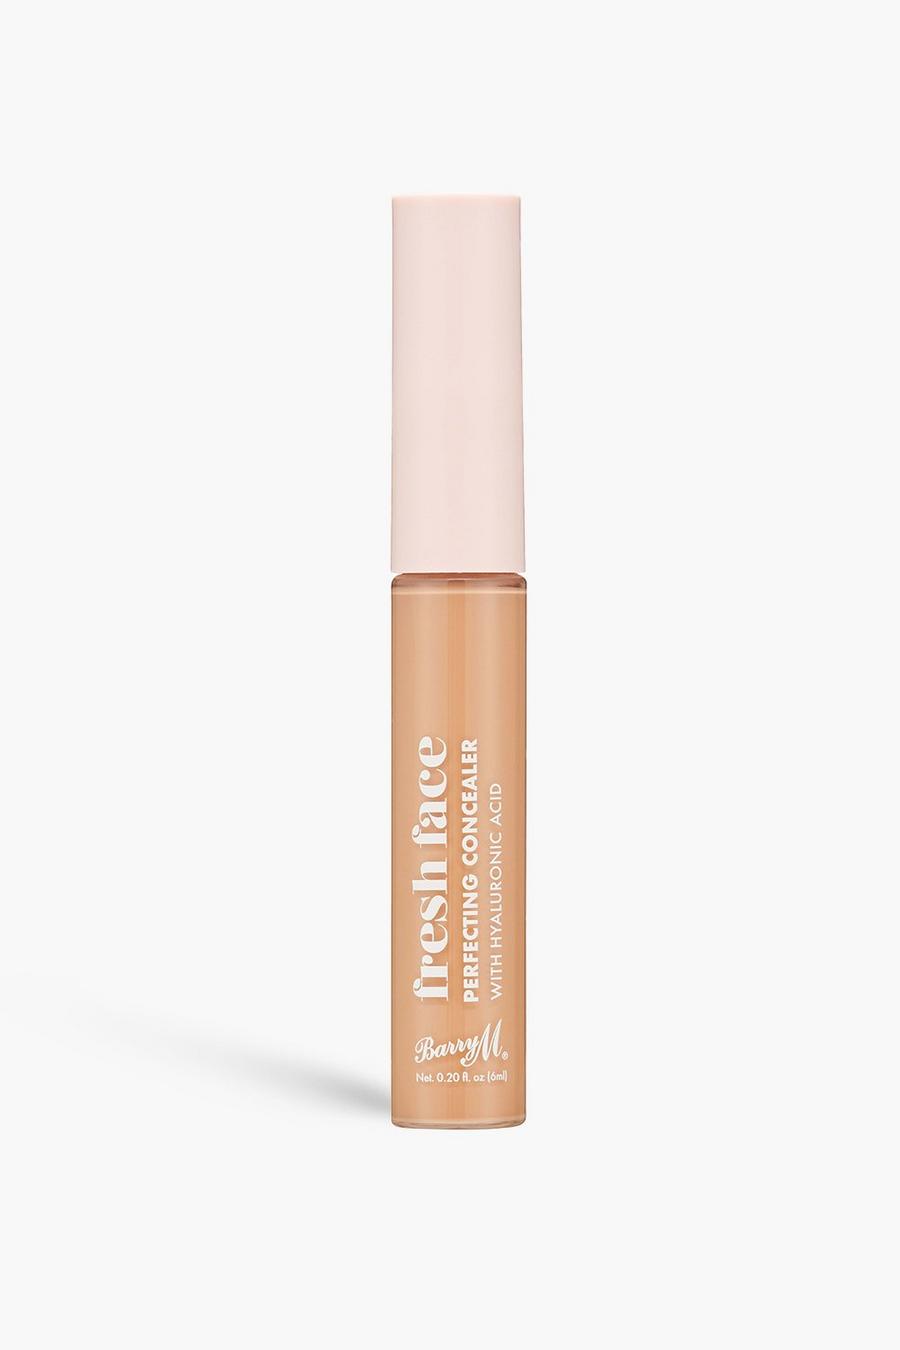 Tan brown Barry M Fresh Face Perfecting Concealer 5